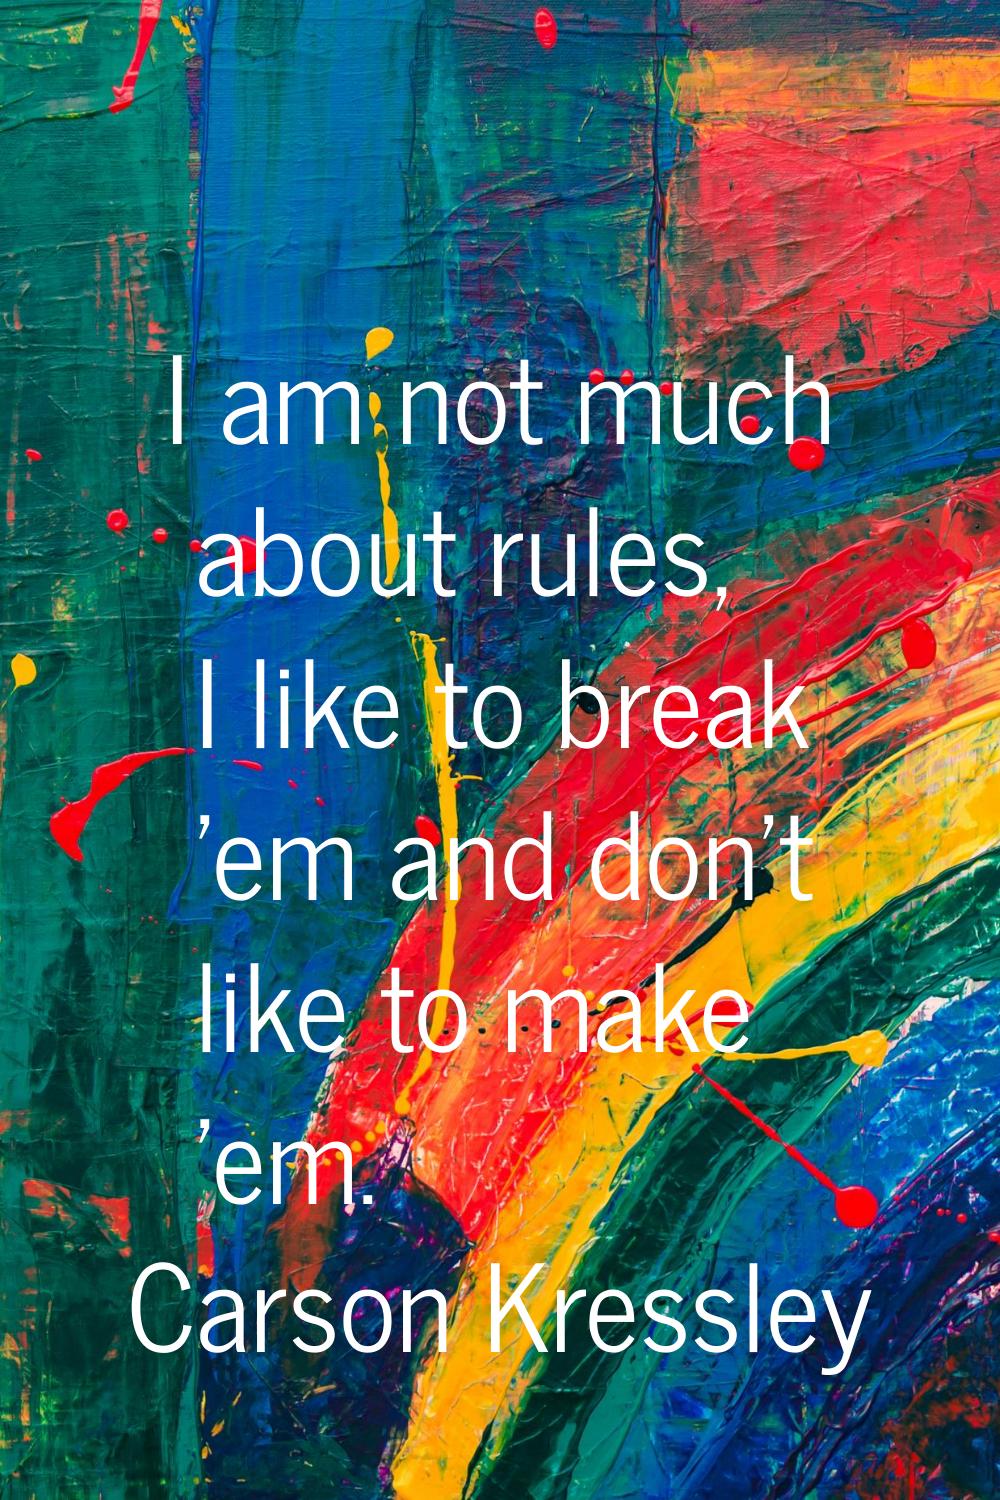 I am not much about rules, I like to break 'em and don't like to make 'em.